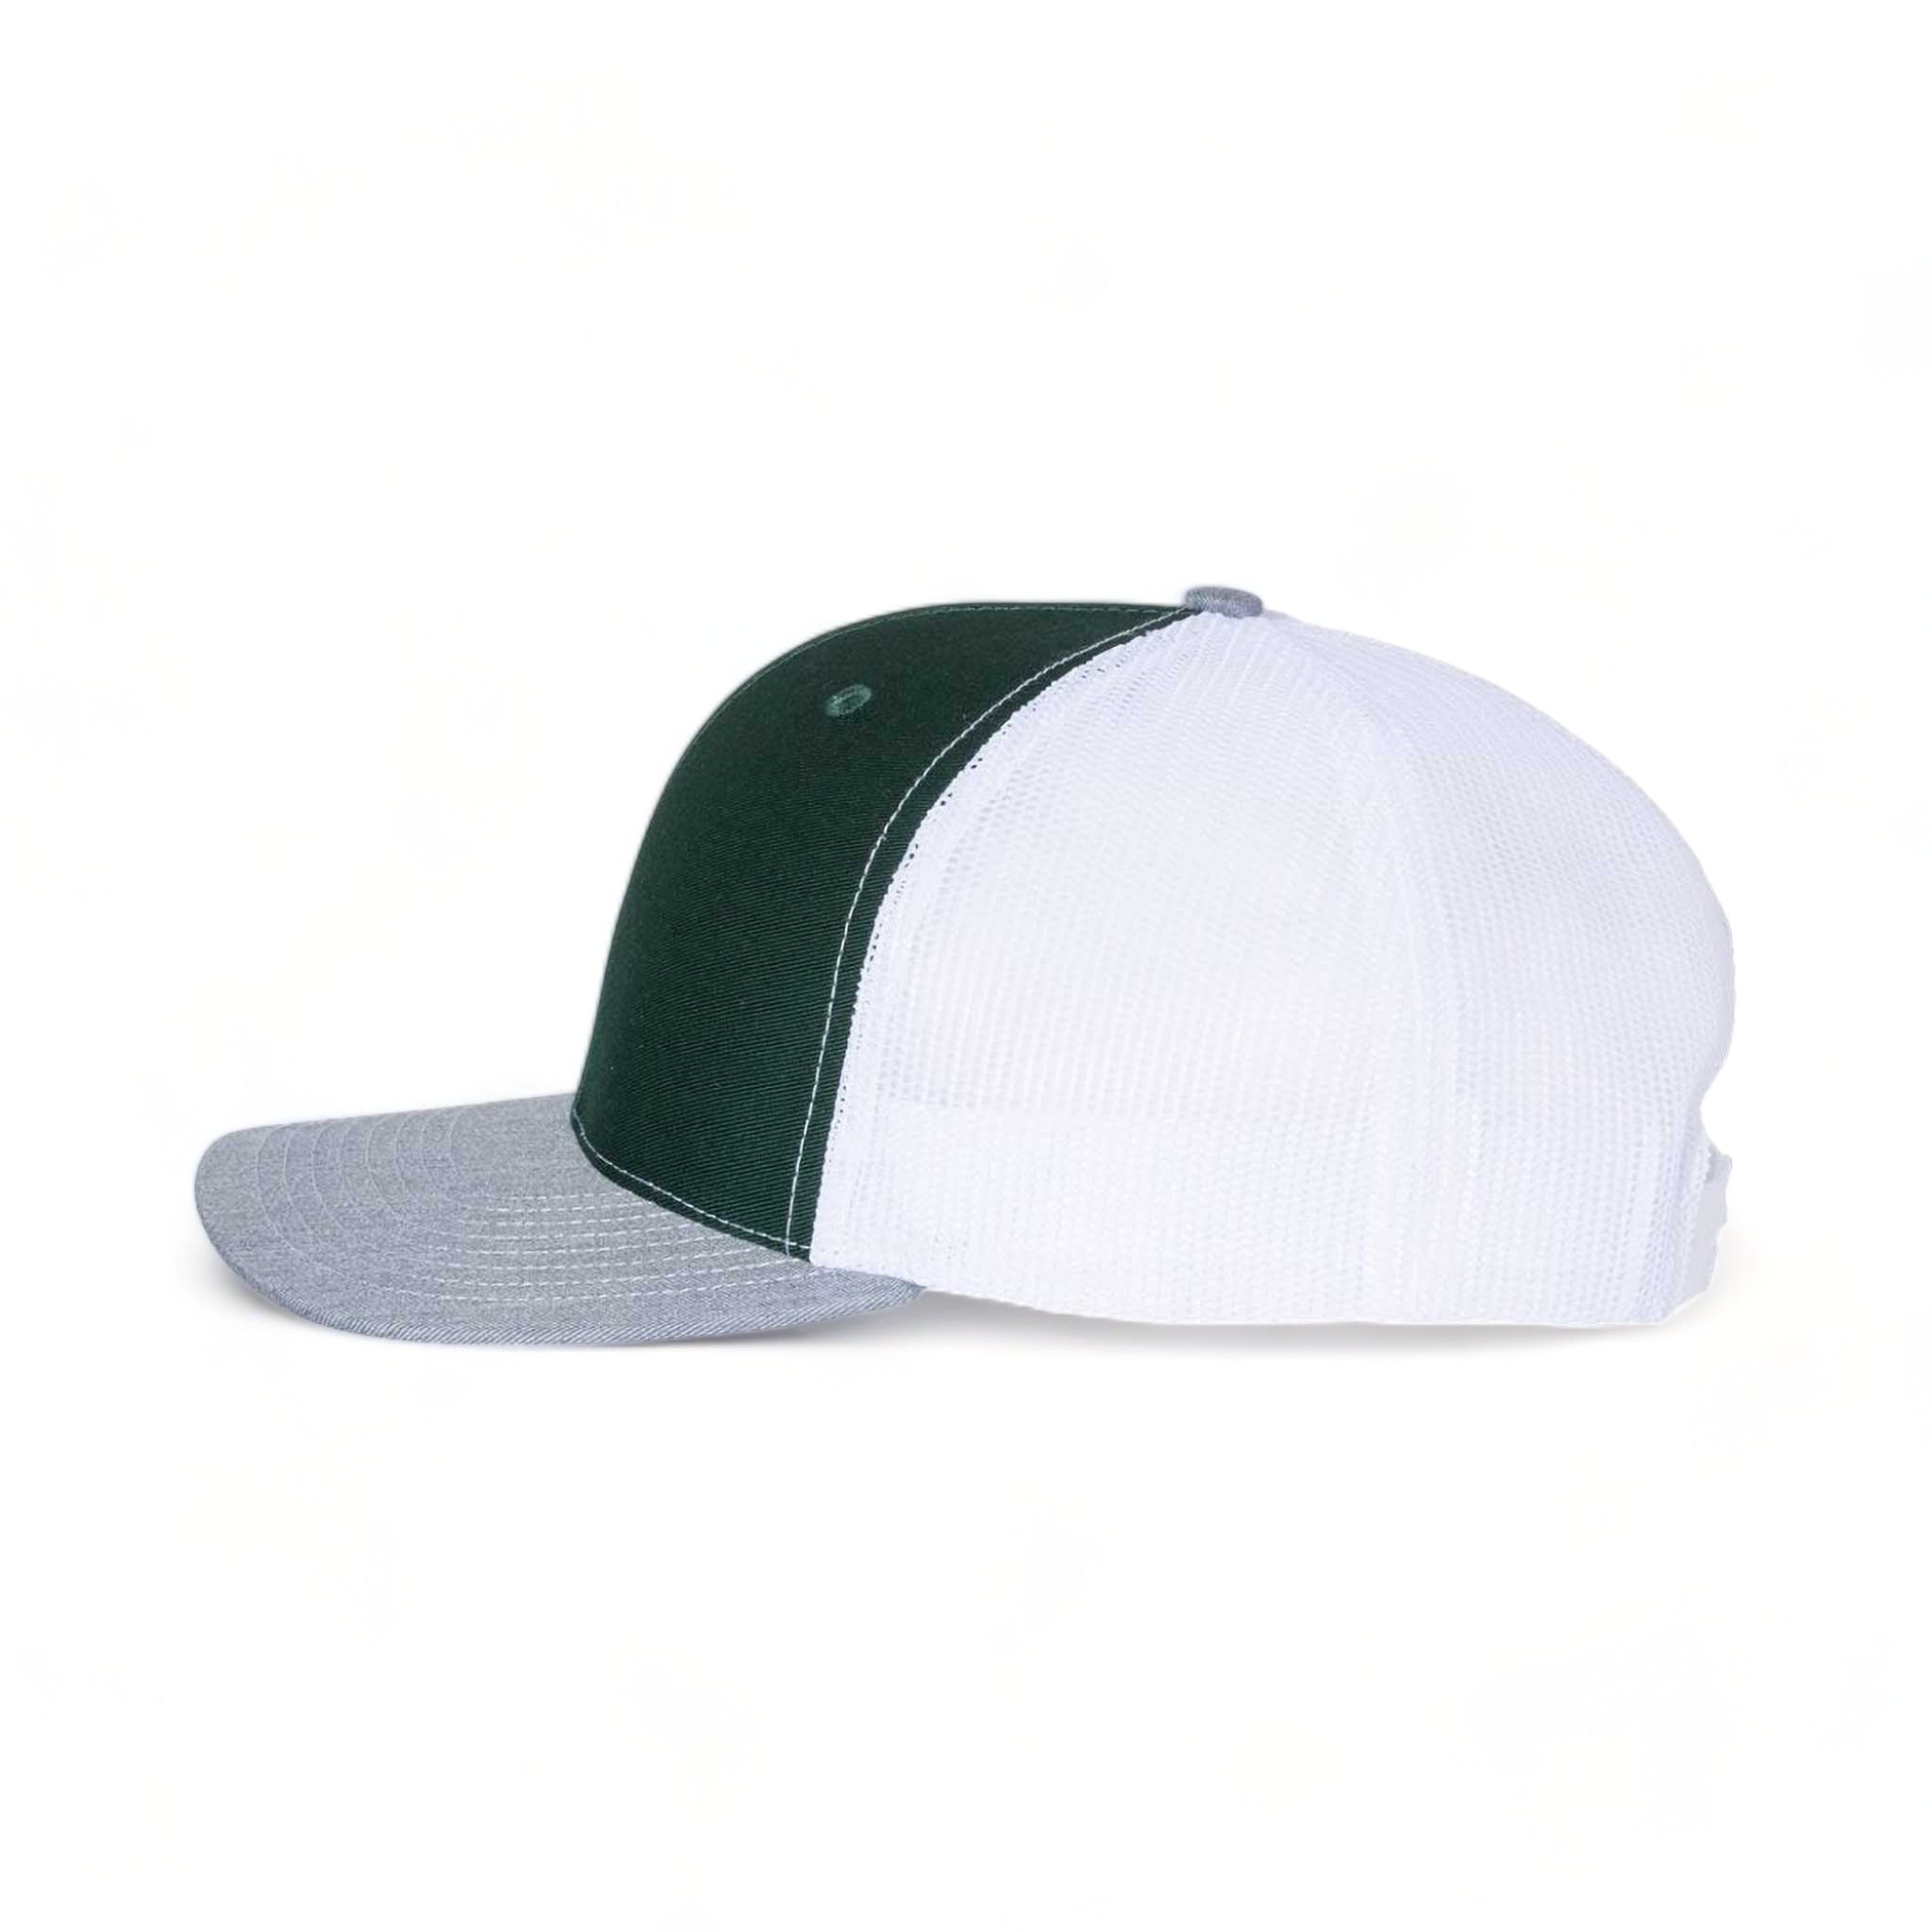 Side view of Richardson 112 custom hat in dark green, white and heather grey